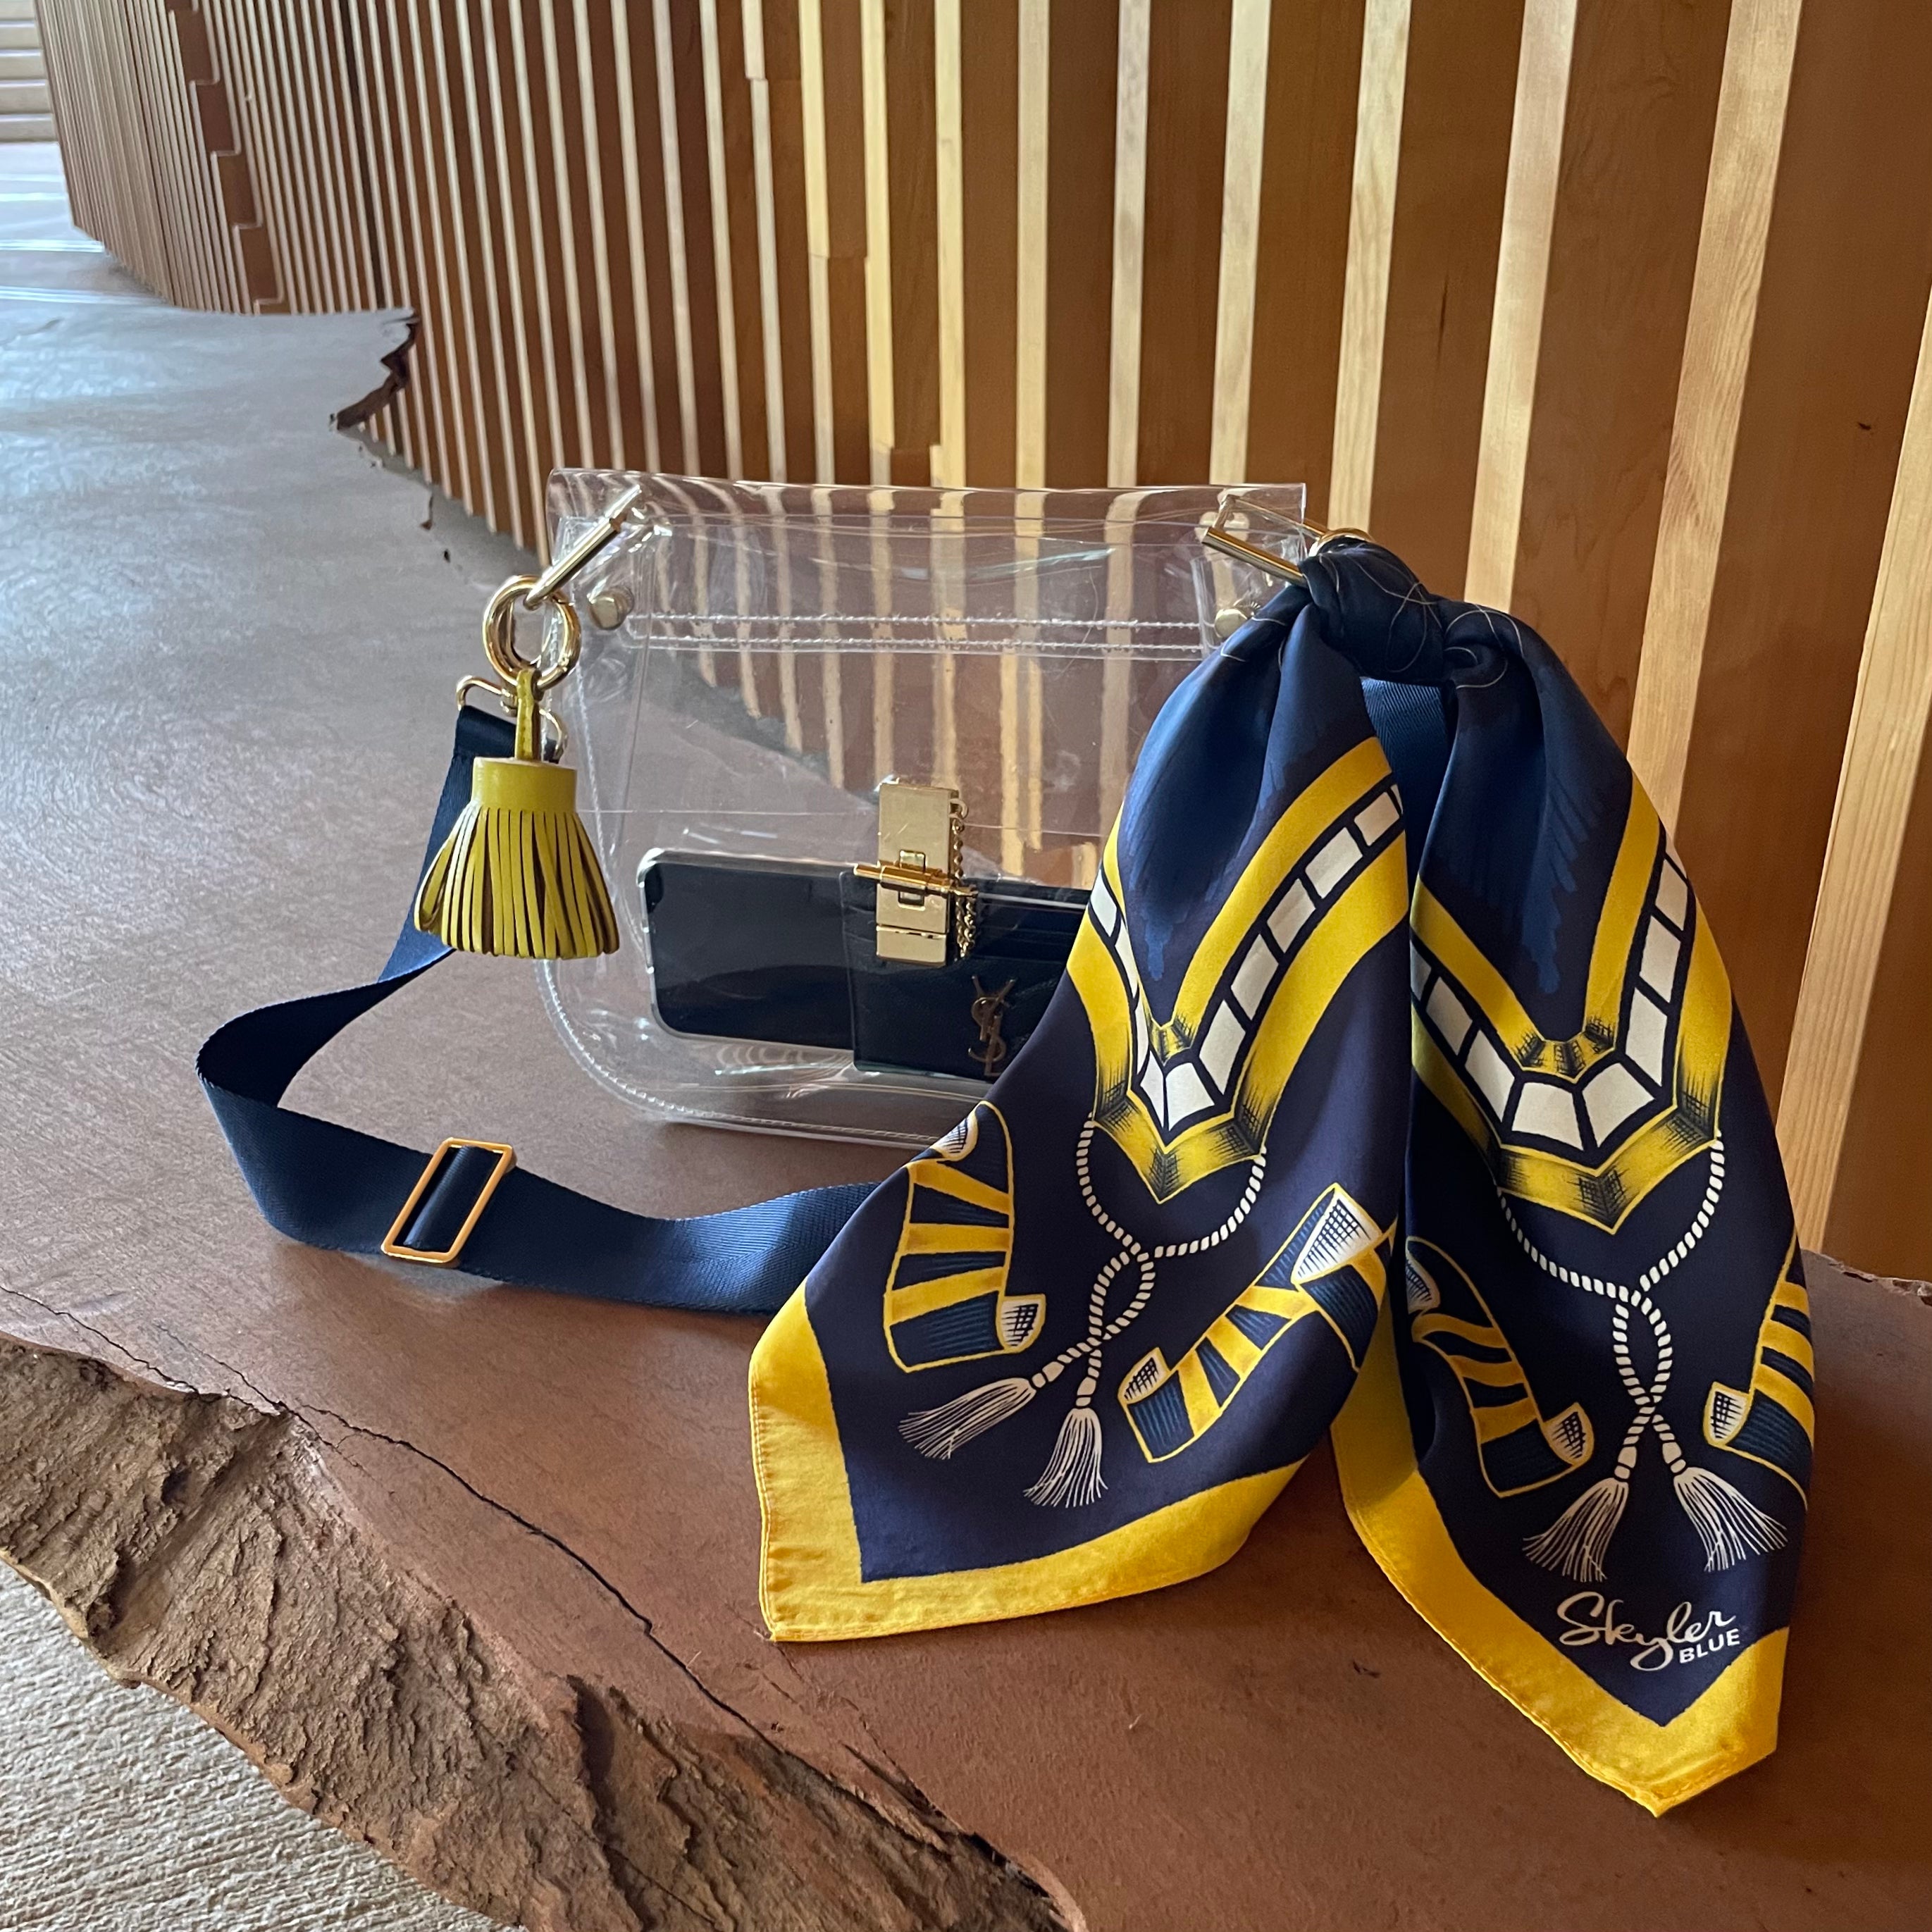 Skyler Blue’s The Ann Arbor Medium Saddle Clear Bag stadium approved clear bag / clear purse including adjustable, nylon webbing shoulder or crossbody strap with herringbone weave and gold hardware, 60-centimeter 100% silk twill scarf, and 100% genuine leather tassel. 